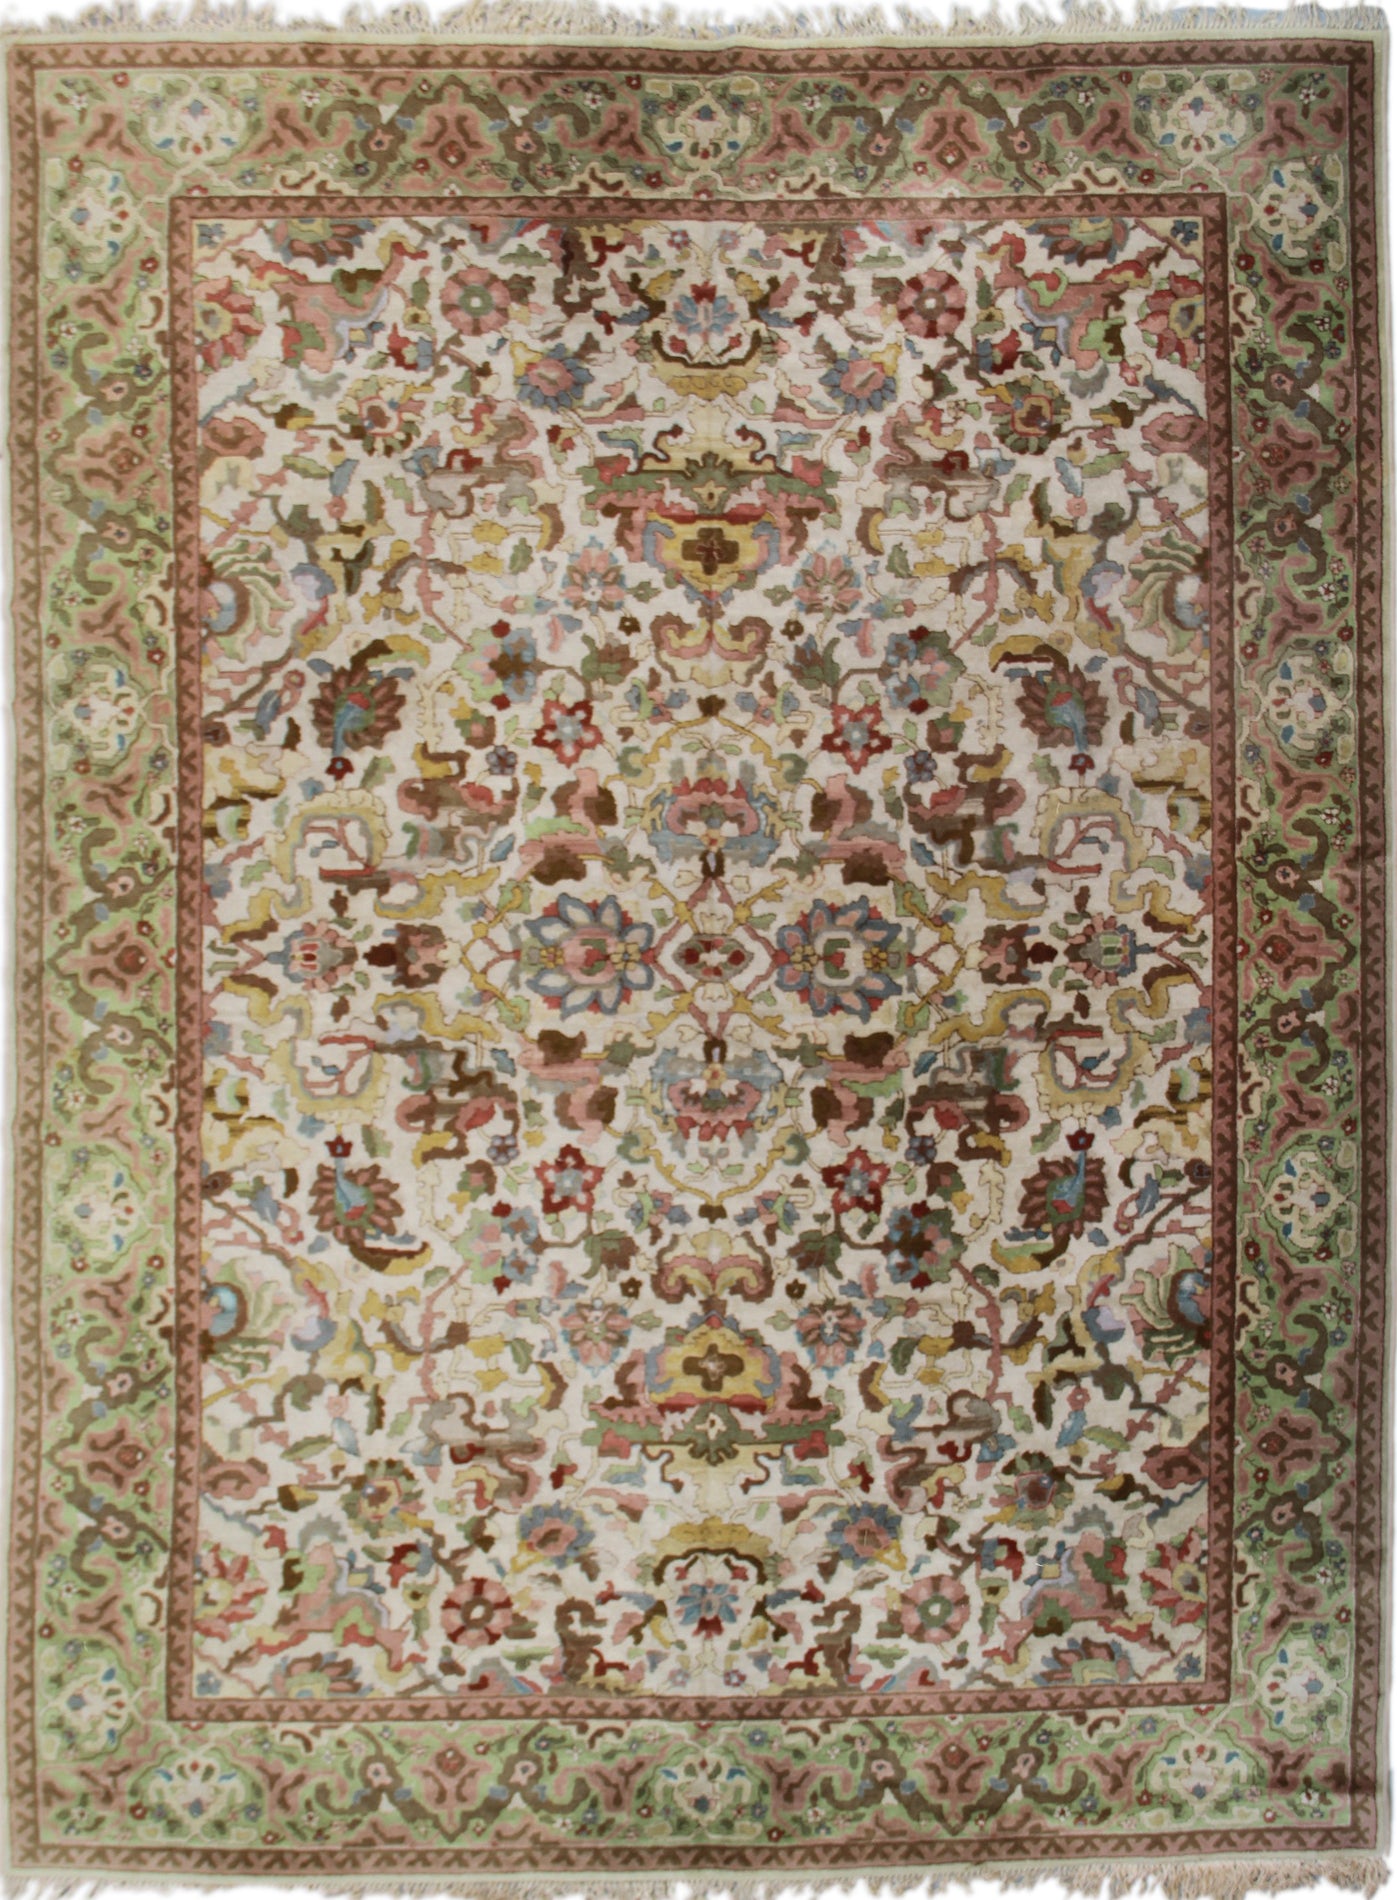 8'x11' Ivory Green Persian Floral Design Antique German Tetx Tufted Rug